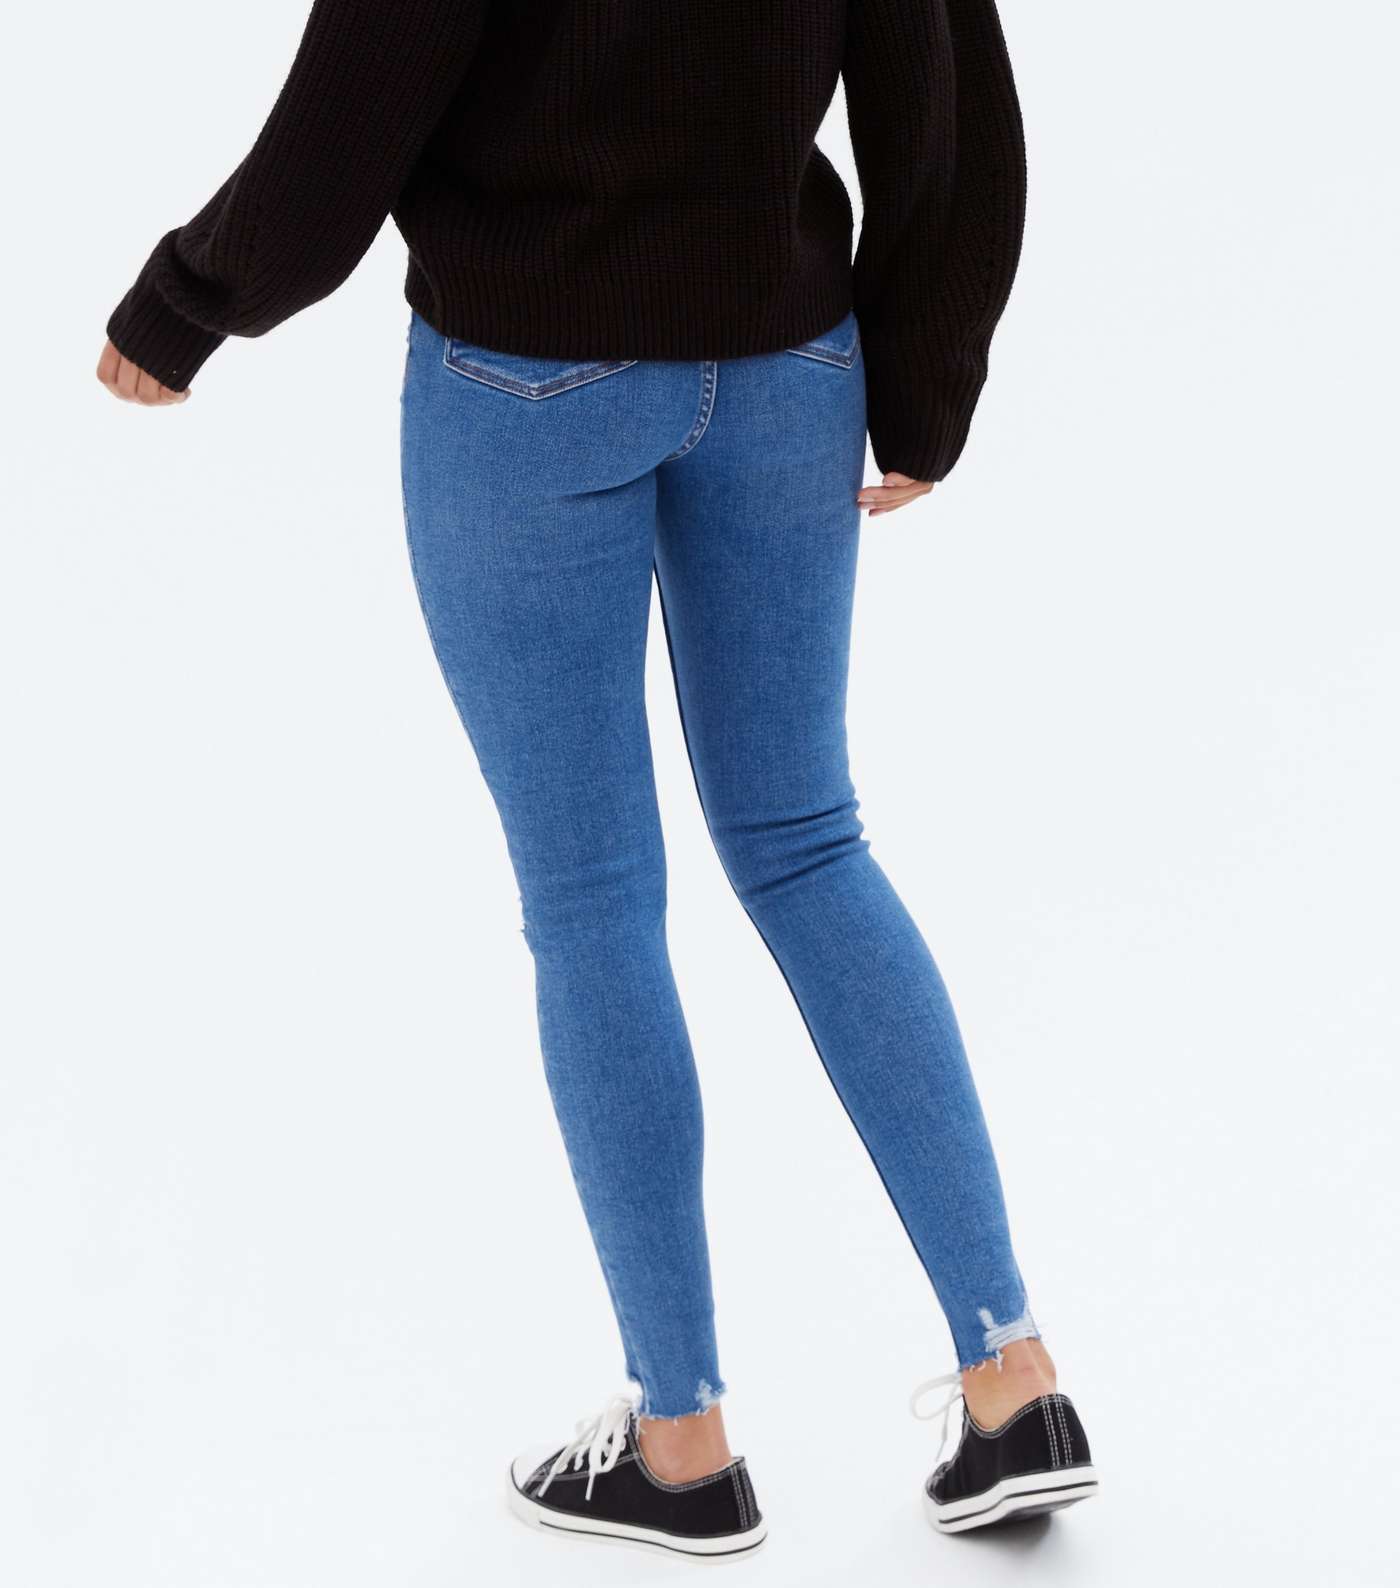 Tall Bright Blue Ripped High Waist Hallie Super Skinny Jeans Image 4